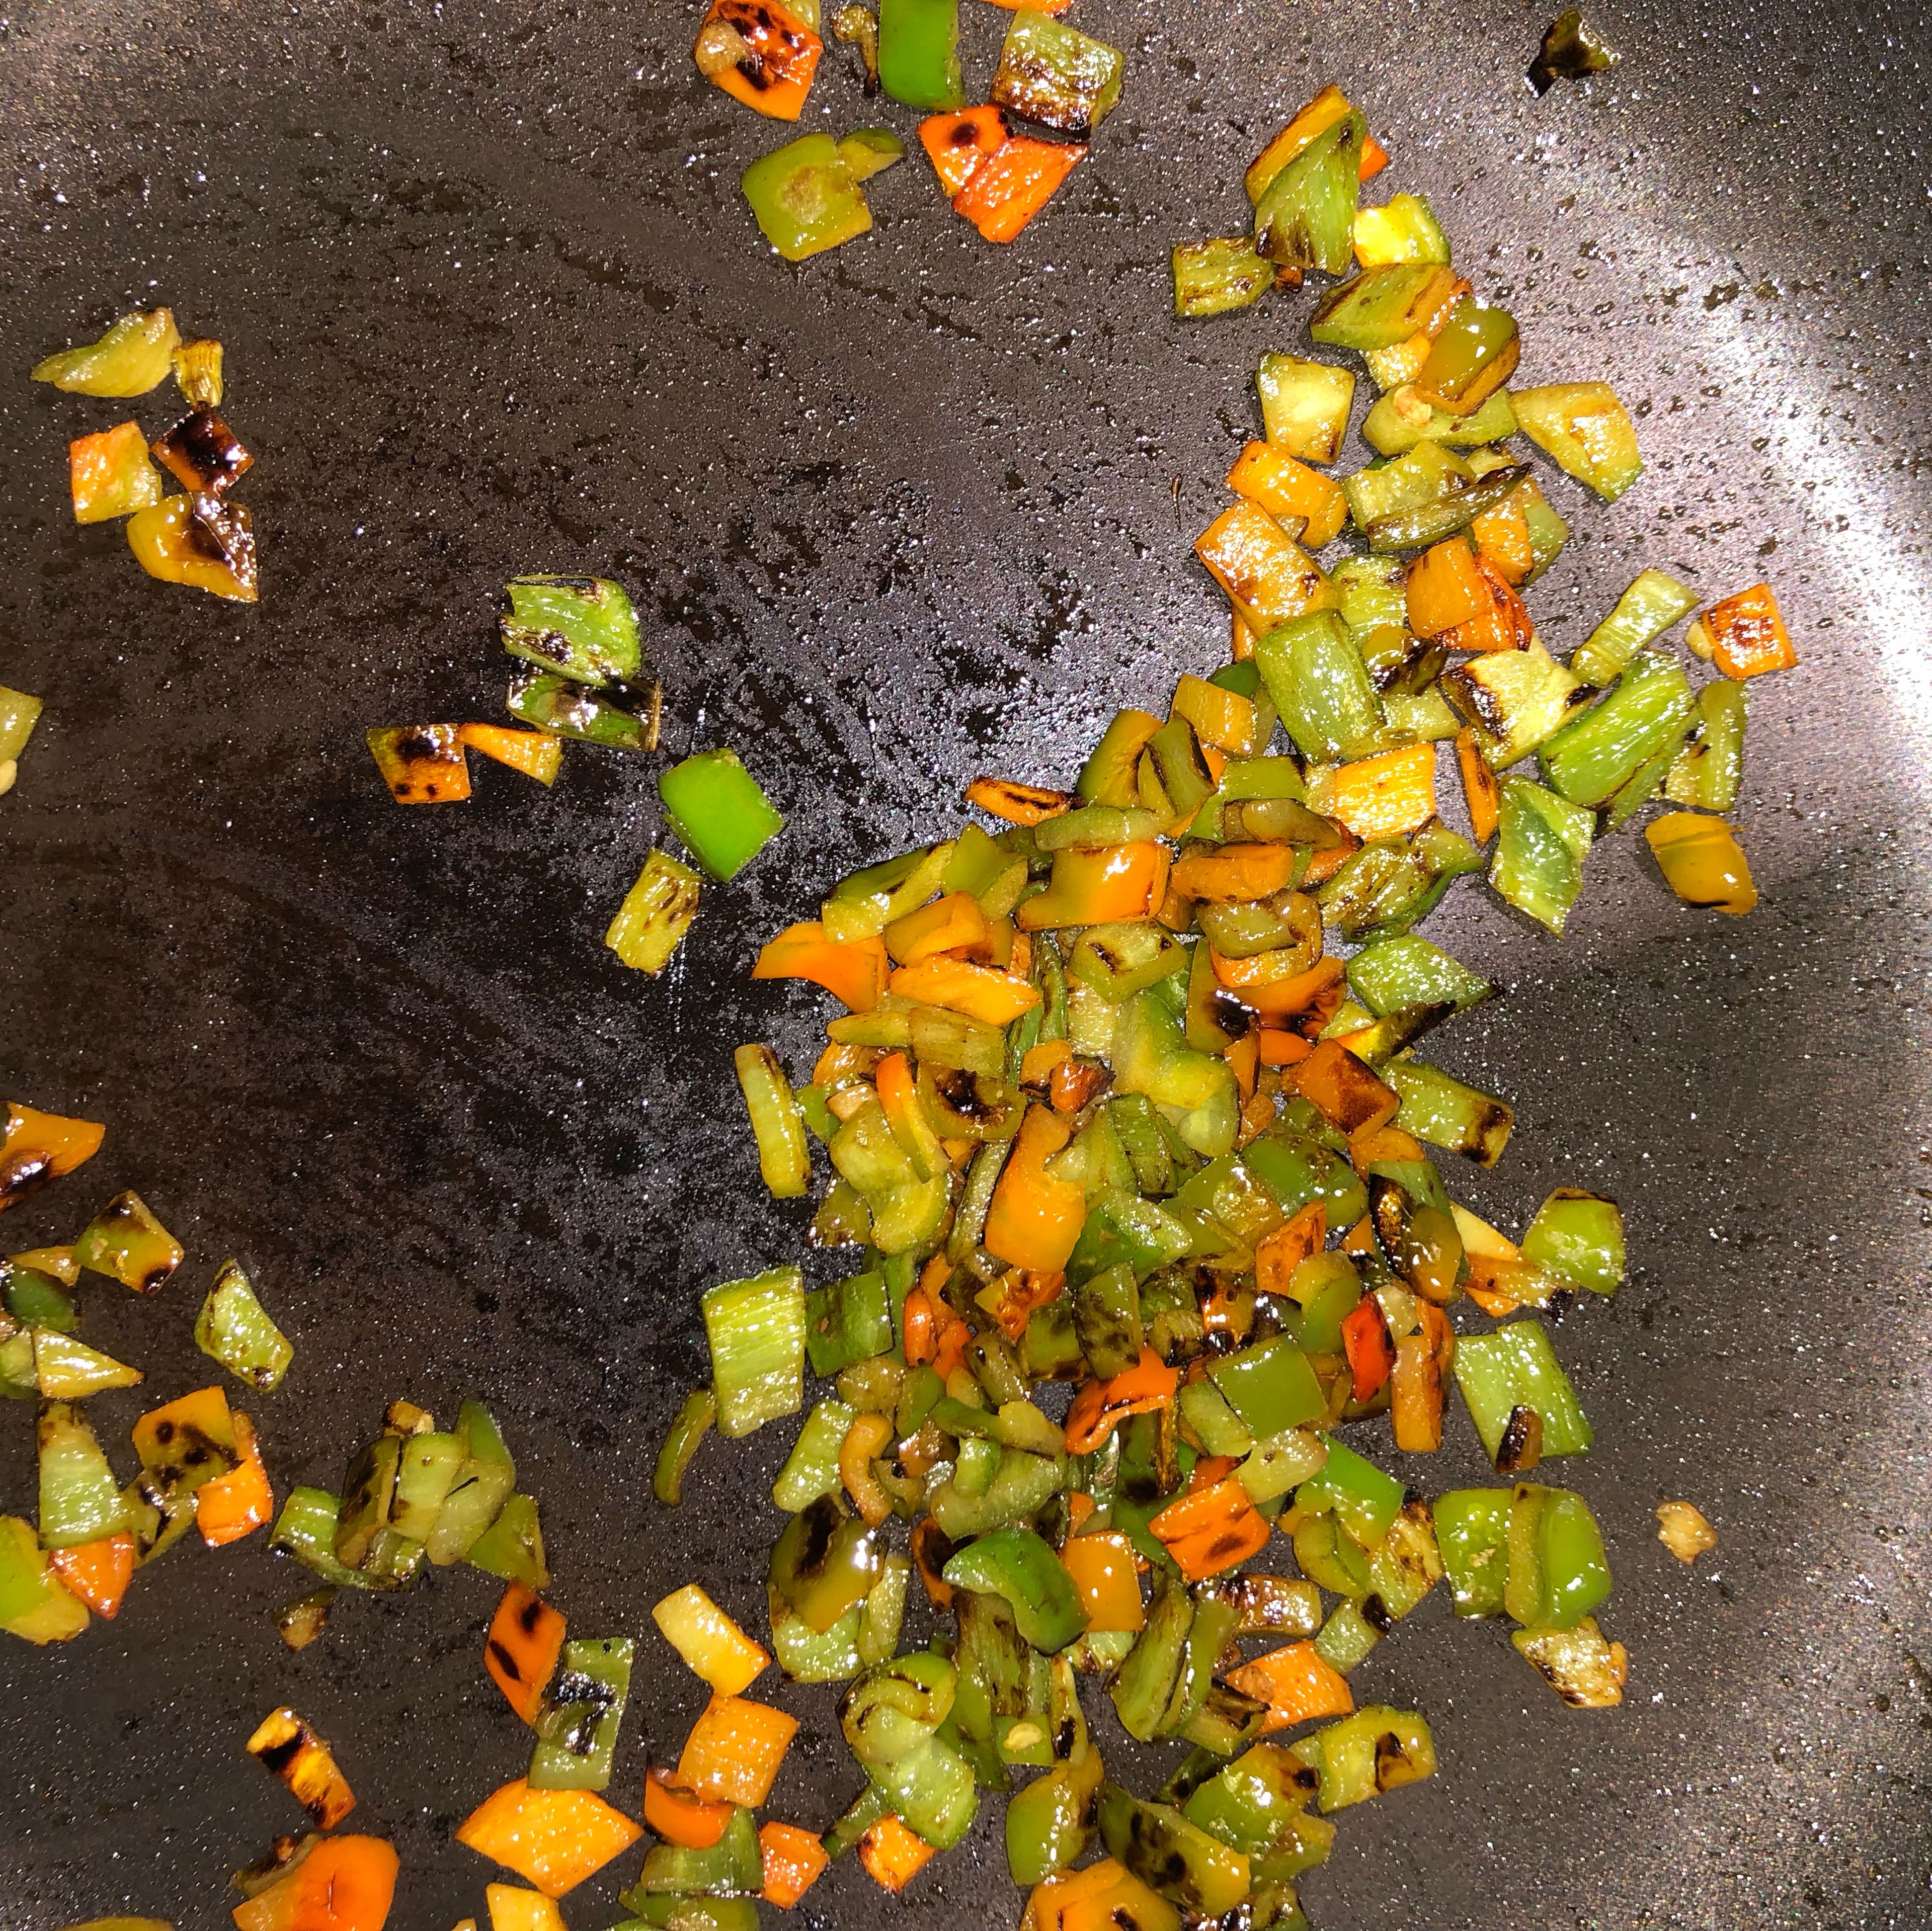 Add a bit of olive oil on the pan and saute the green bell peppers.